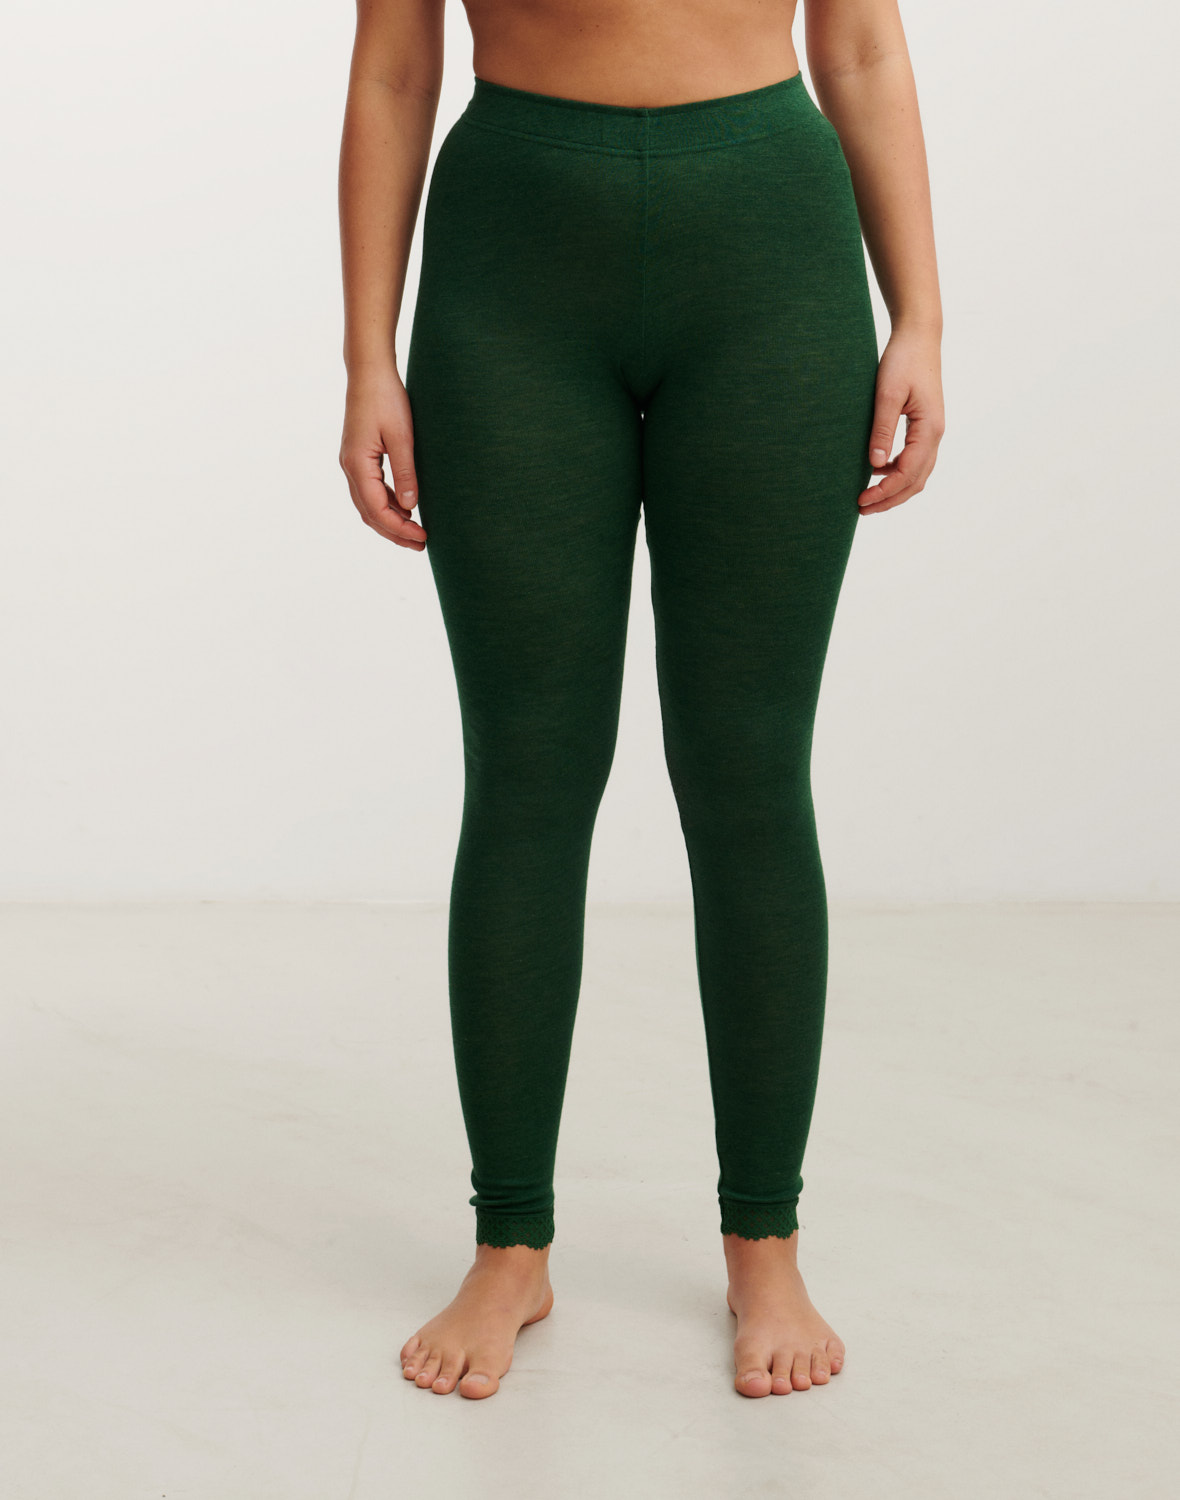 Chilled Leggings - Emerald Green – yuly360